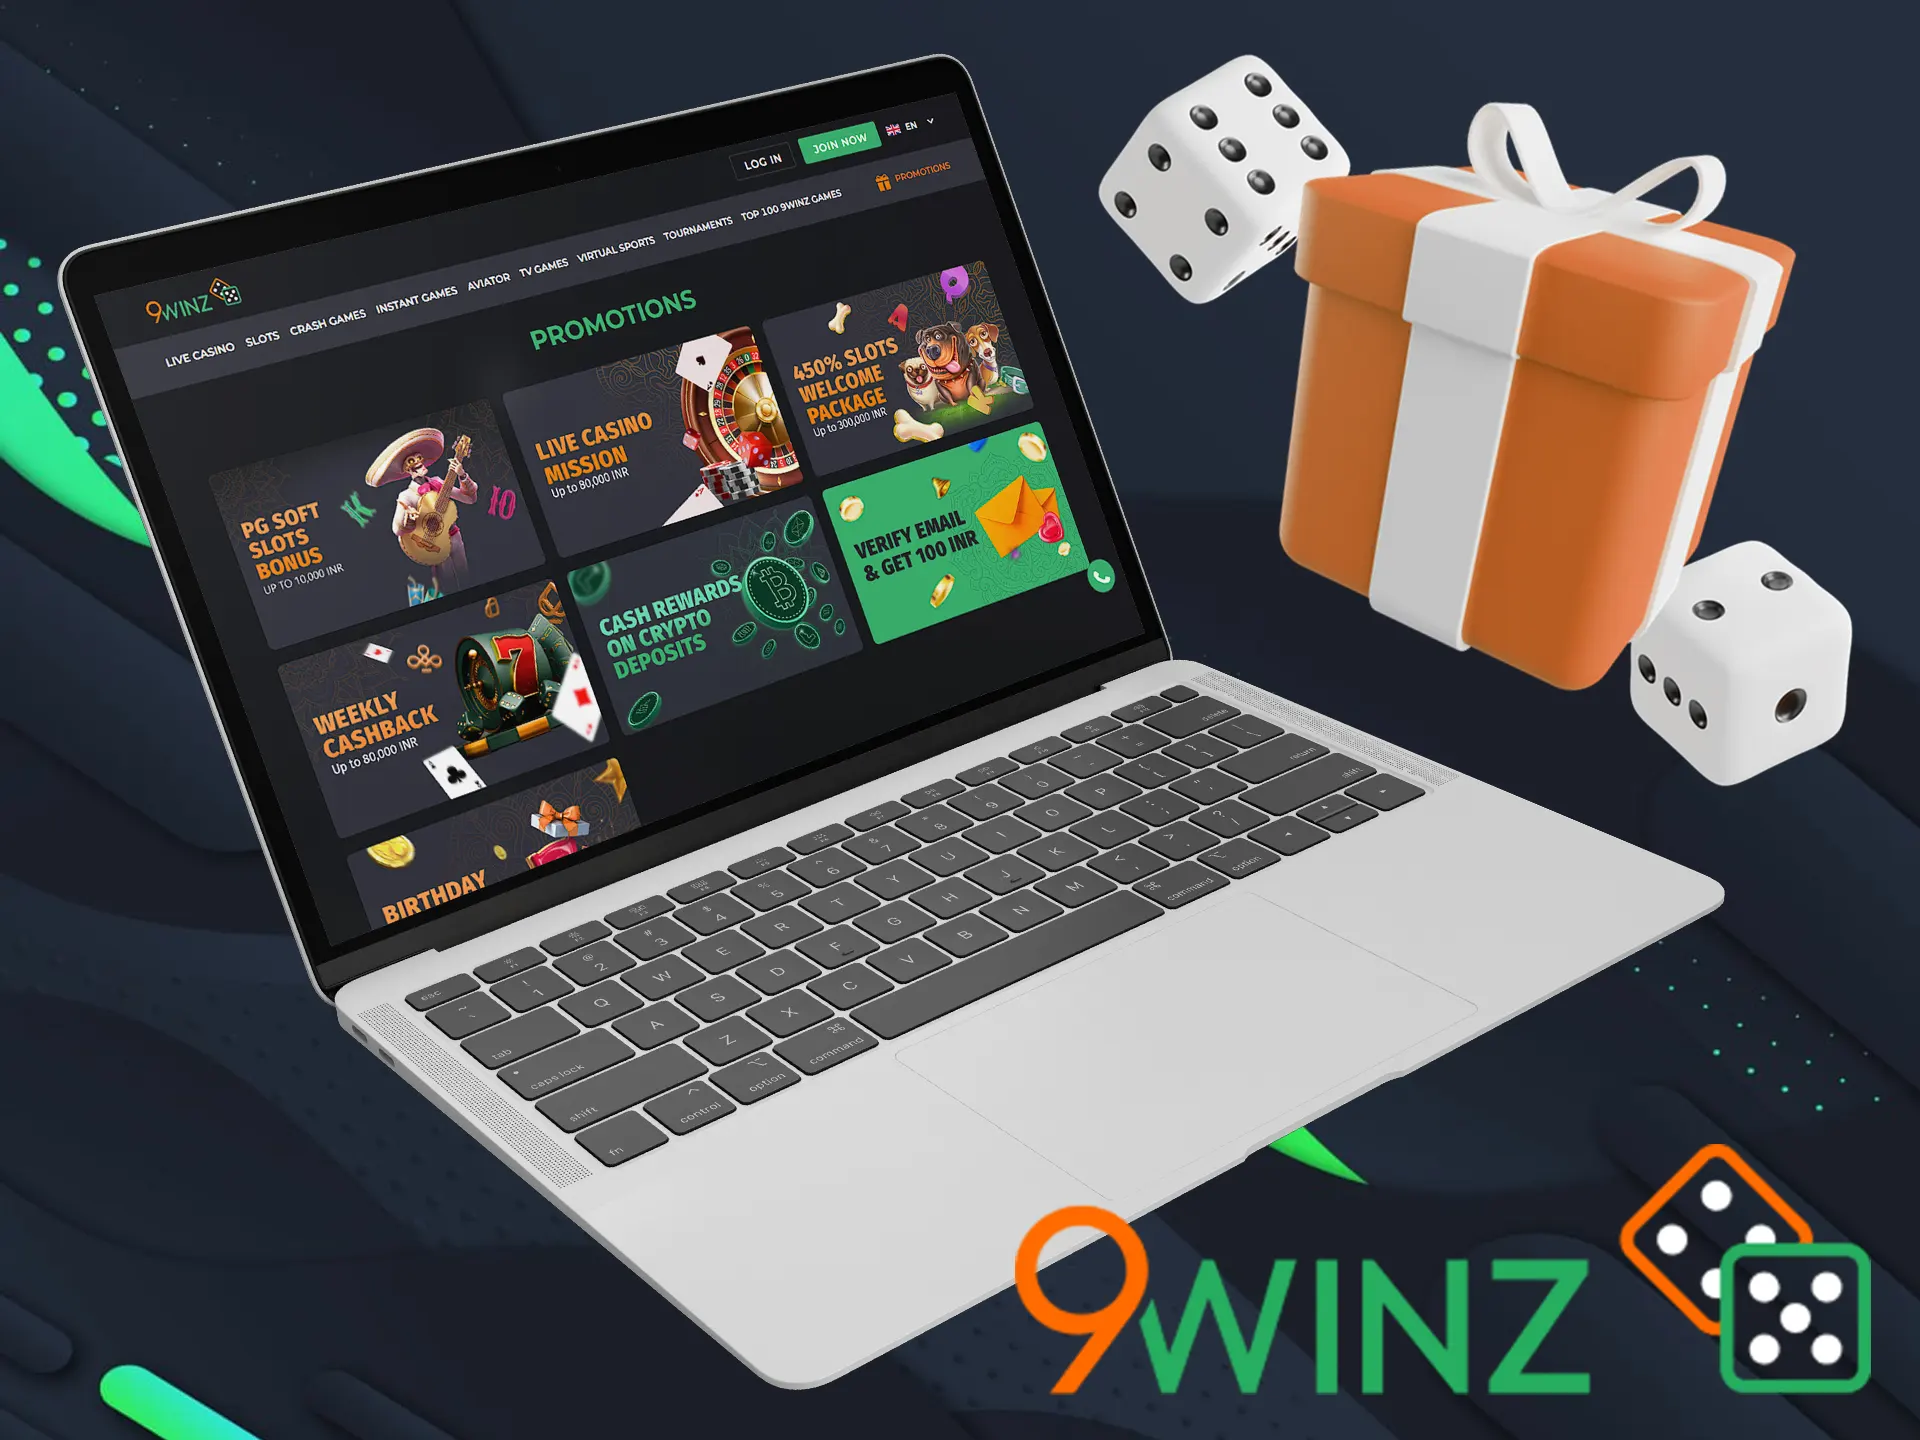 Get your TV games casino bonus at the 9winz promotions tab.